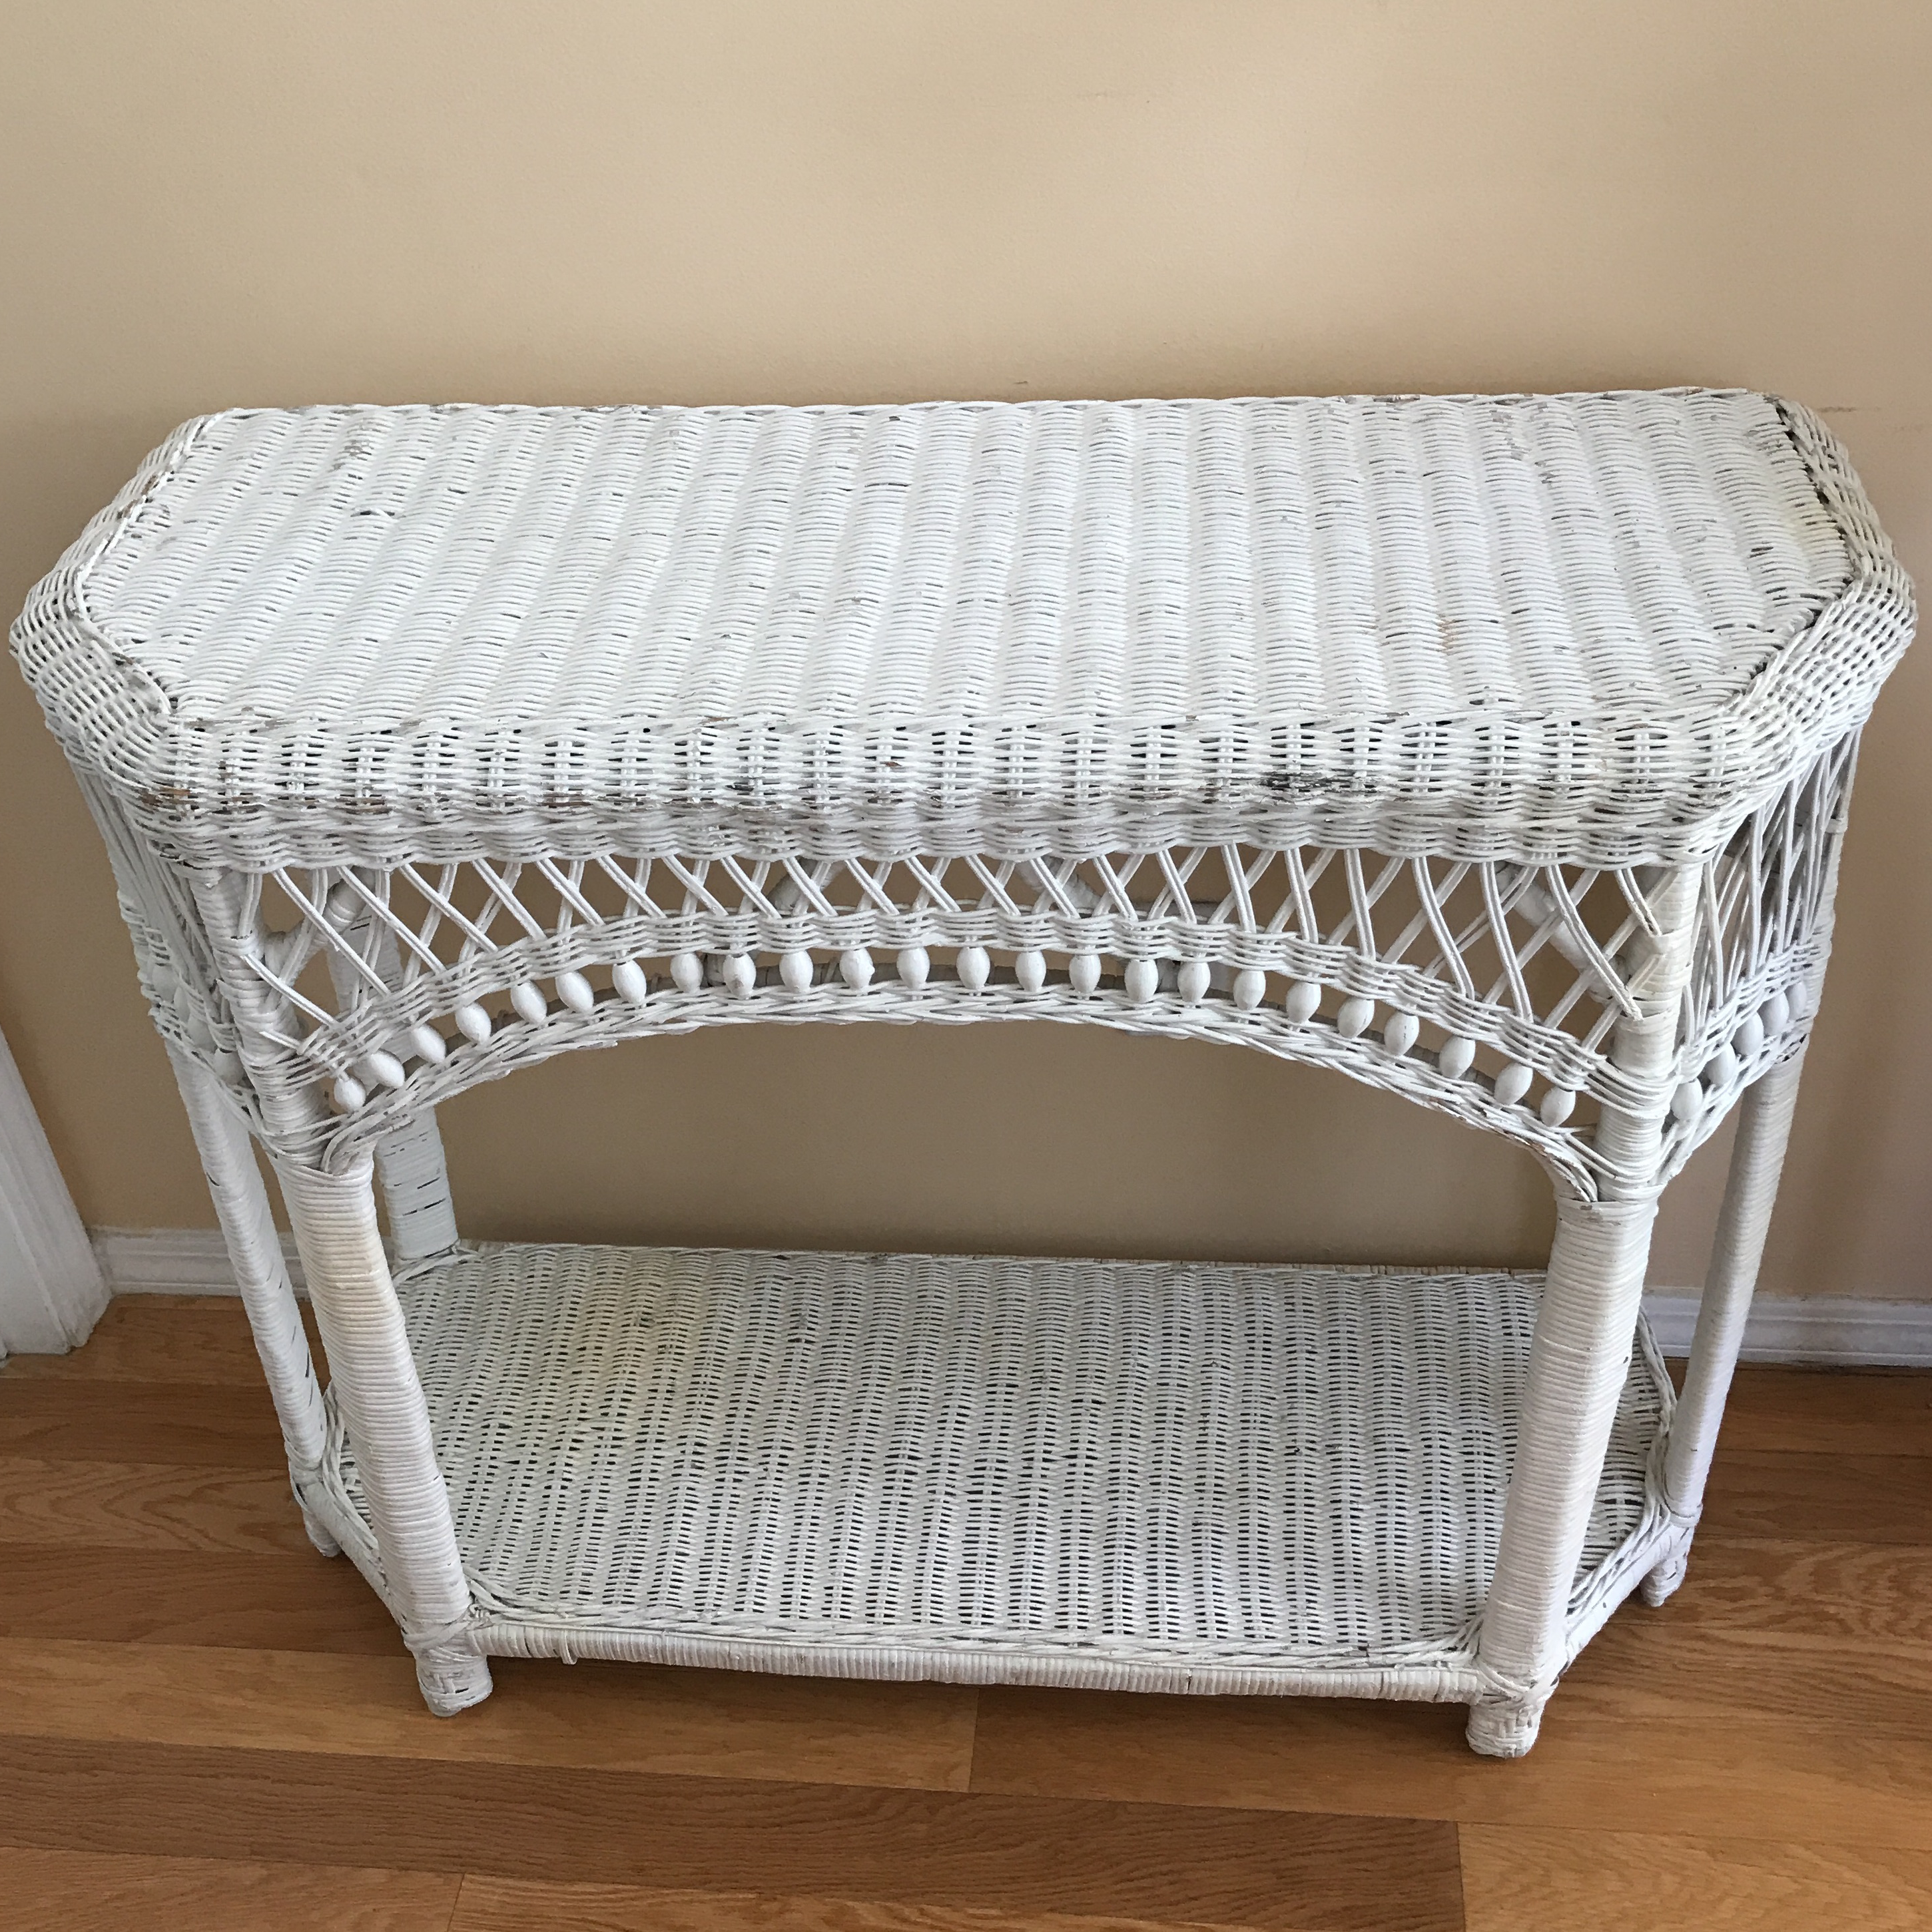 white wicker side table dotbot glass end tables and vintage credenza bar accent fabulous for indoor outdoor use recliner armchair mid century dining room furniture top coffee with